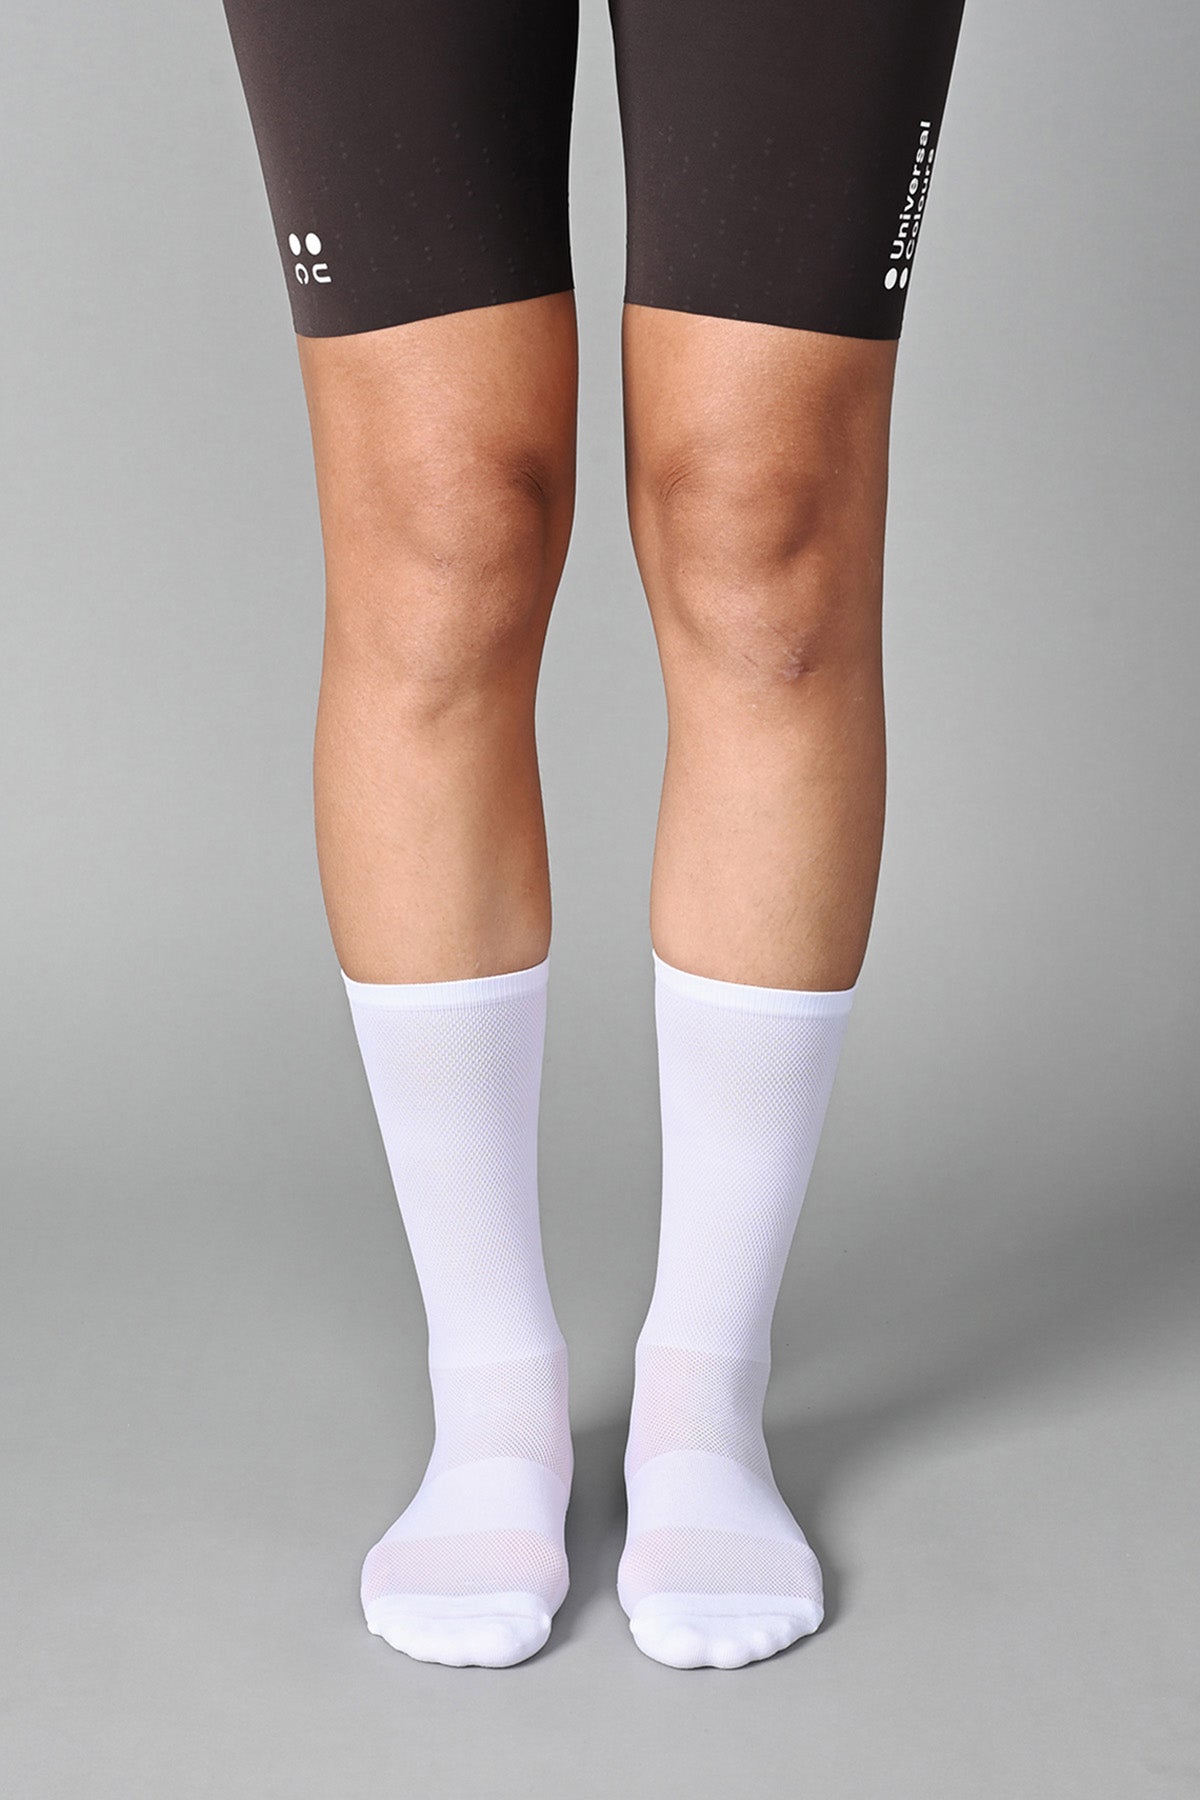 STEALTH - WHITE FRONT | BEST CYCLING SOCKS